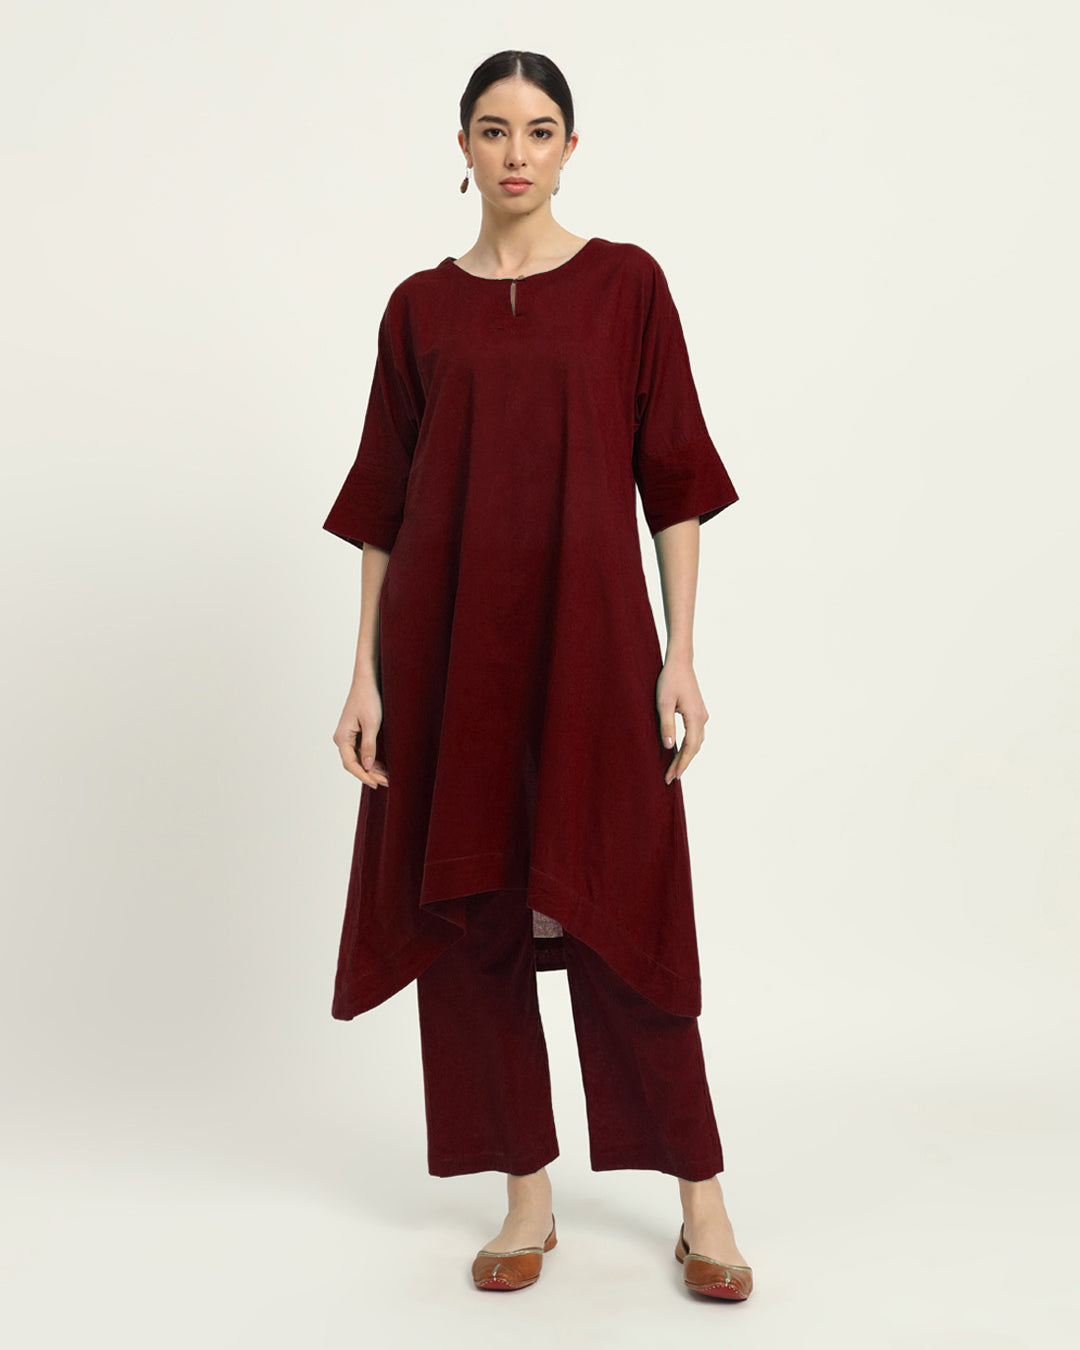 Russet Red Flare & Flow Boat Neck Solid Kurta (Without Bottoms)